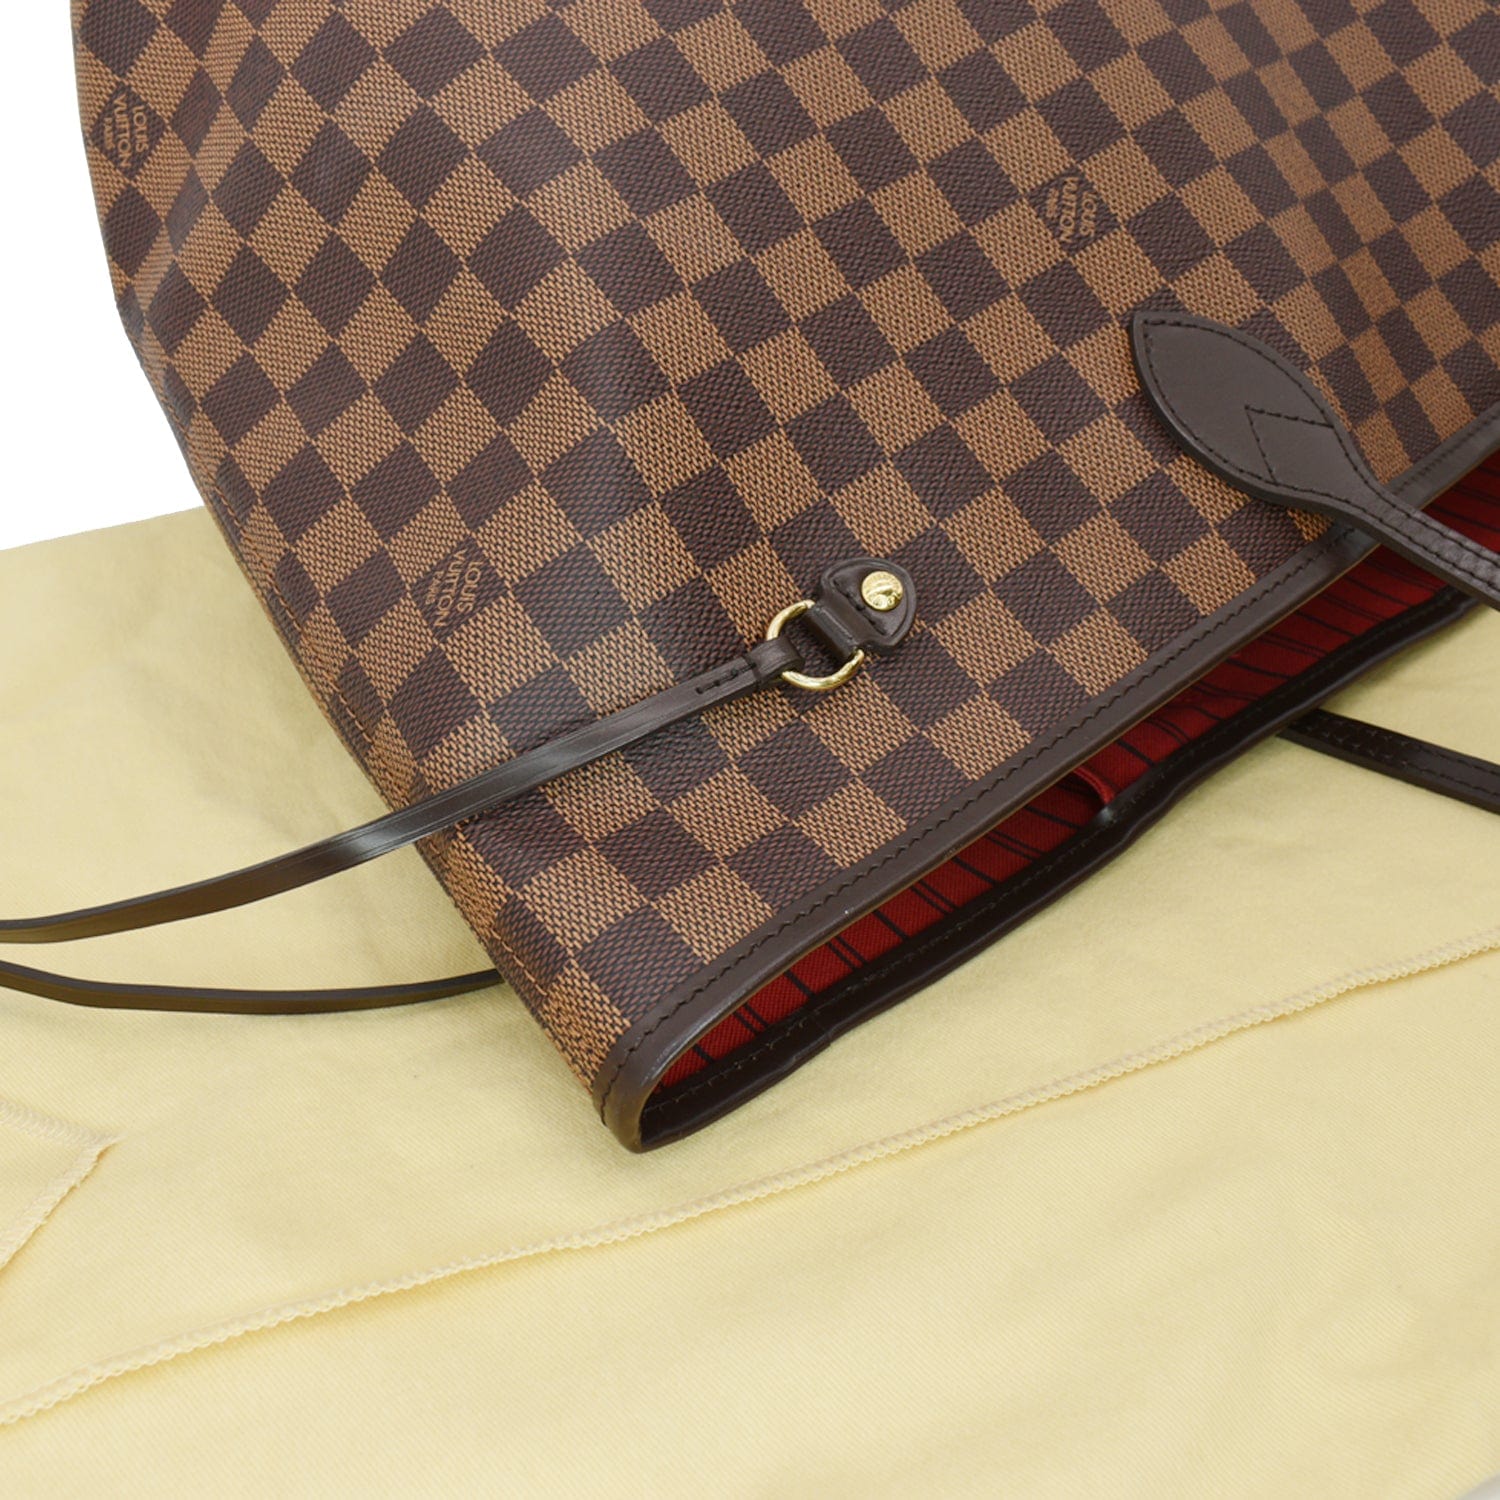 Louis Vuitton Neverfull GM Tote in Damier Ebene Canvas